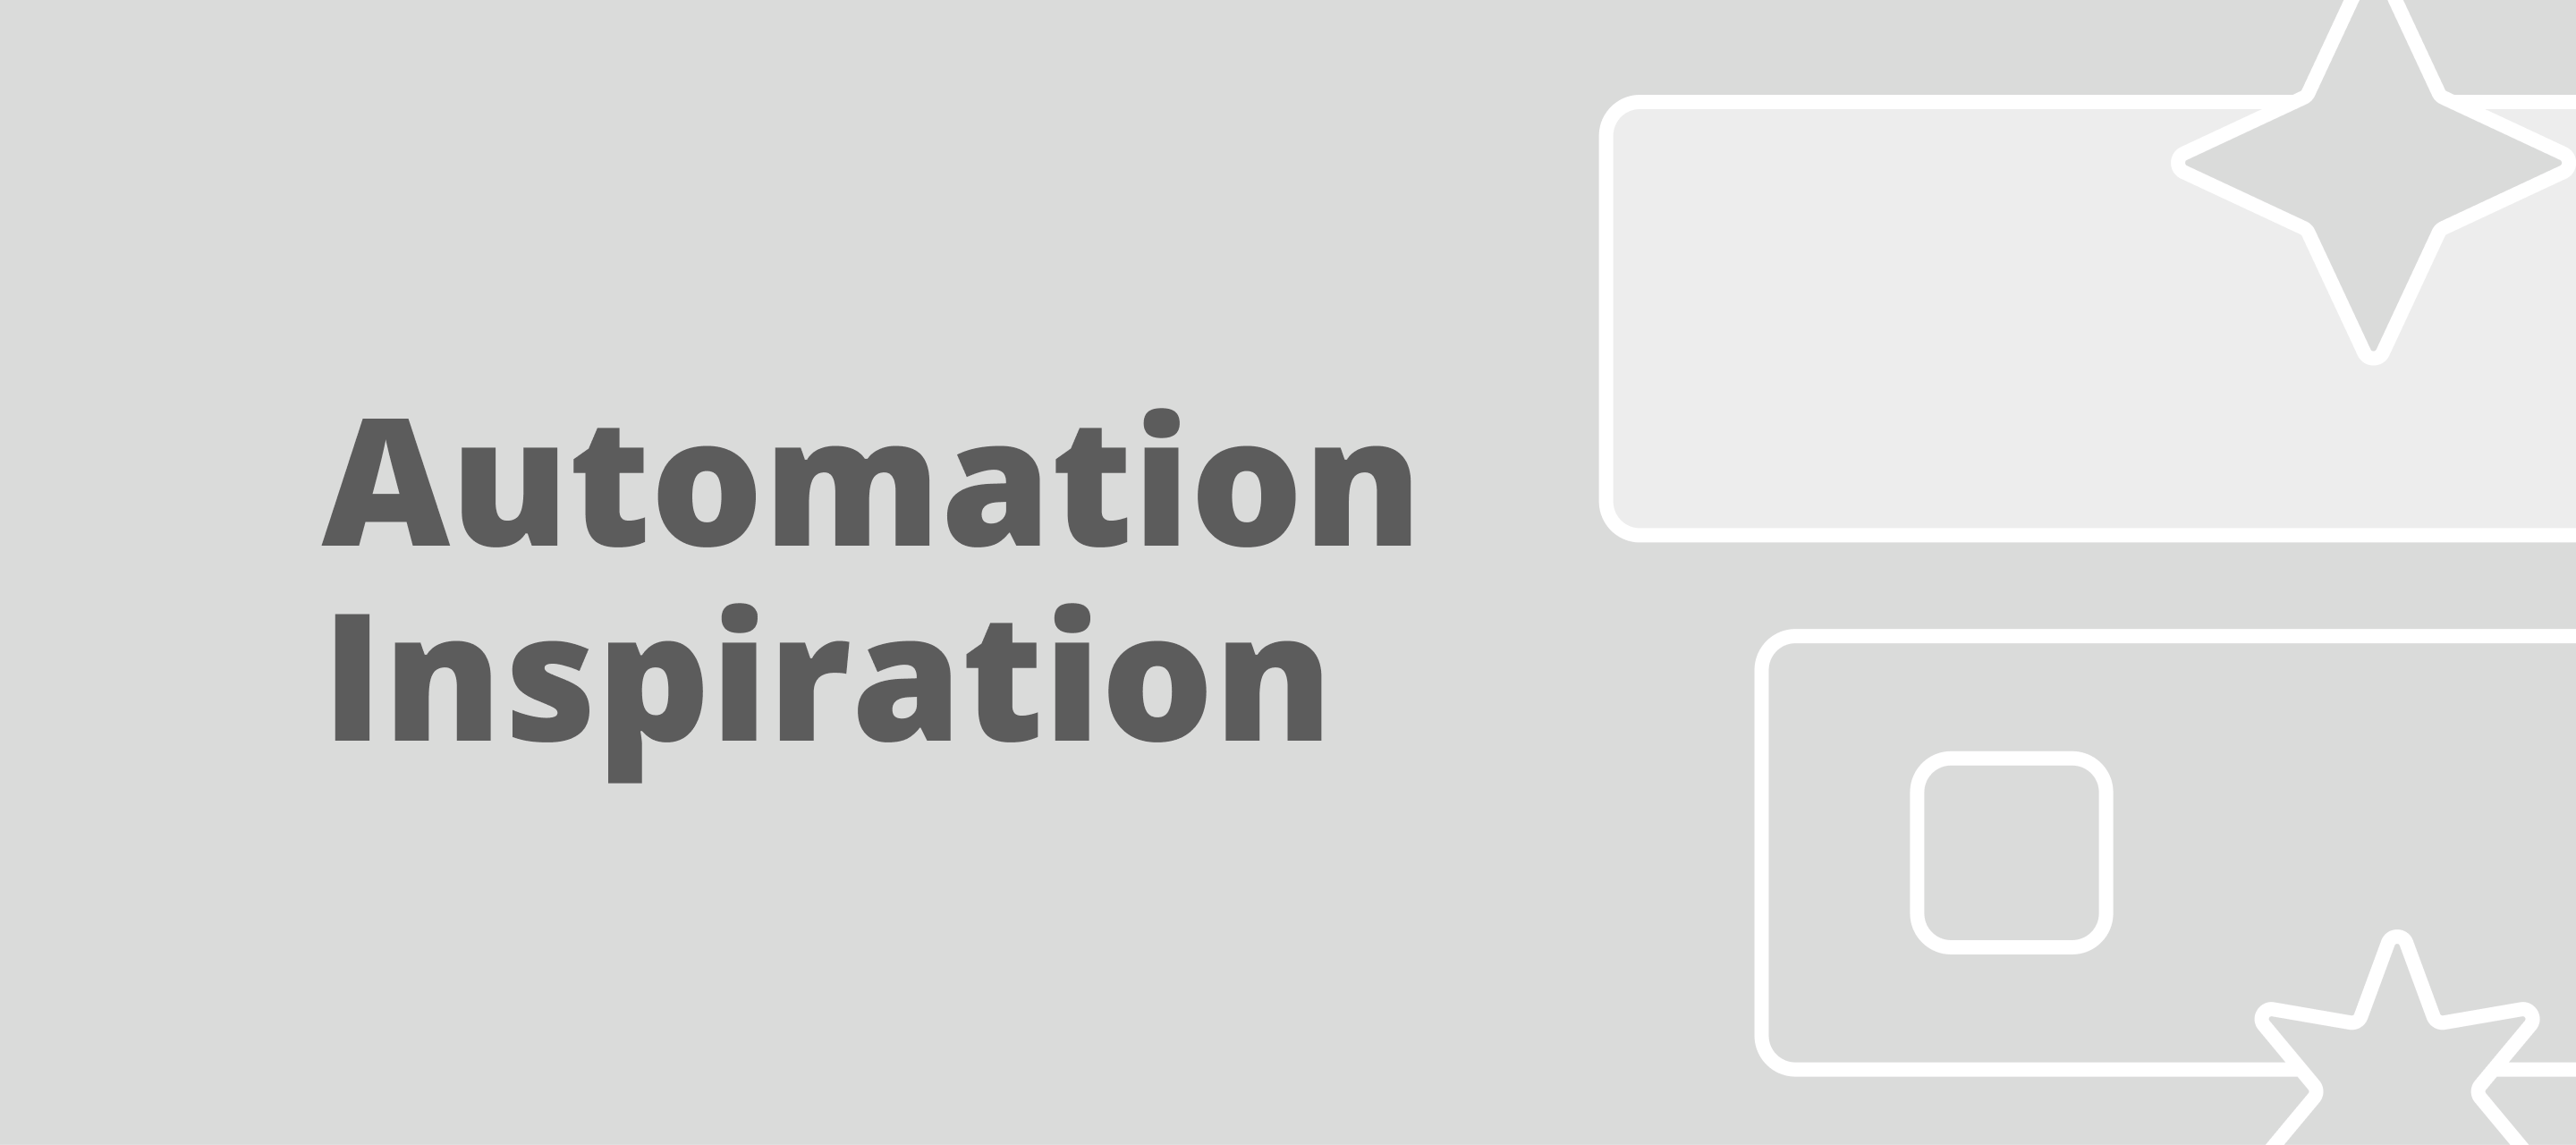 3 ways to empower your team with automation